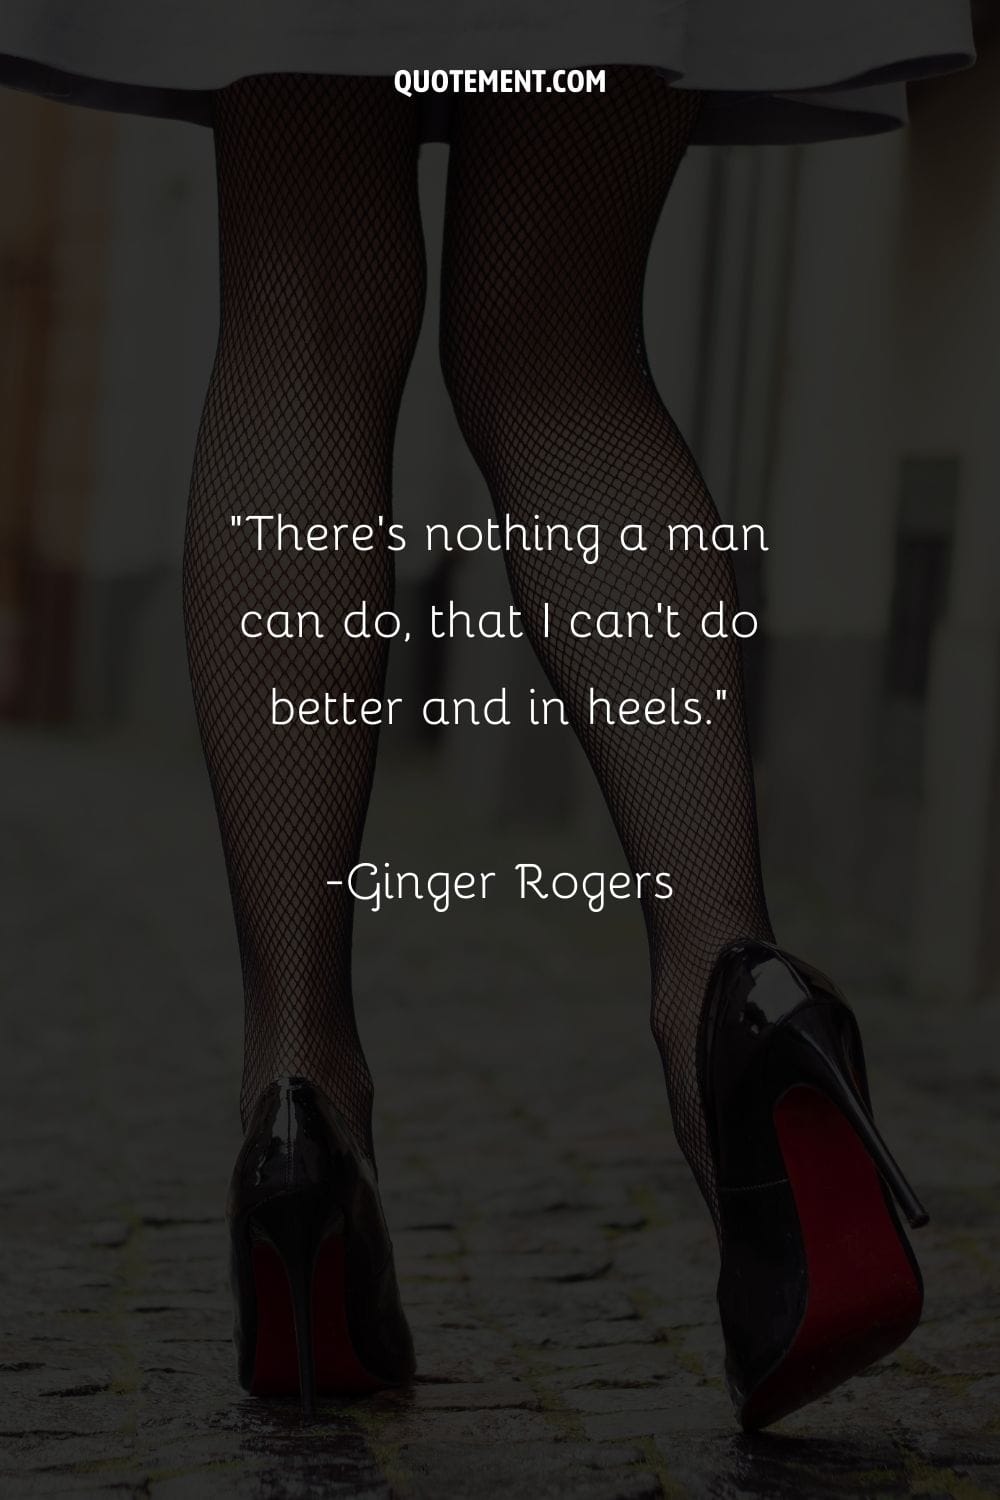 Image of a woman in high heels representing sassy woman quote.